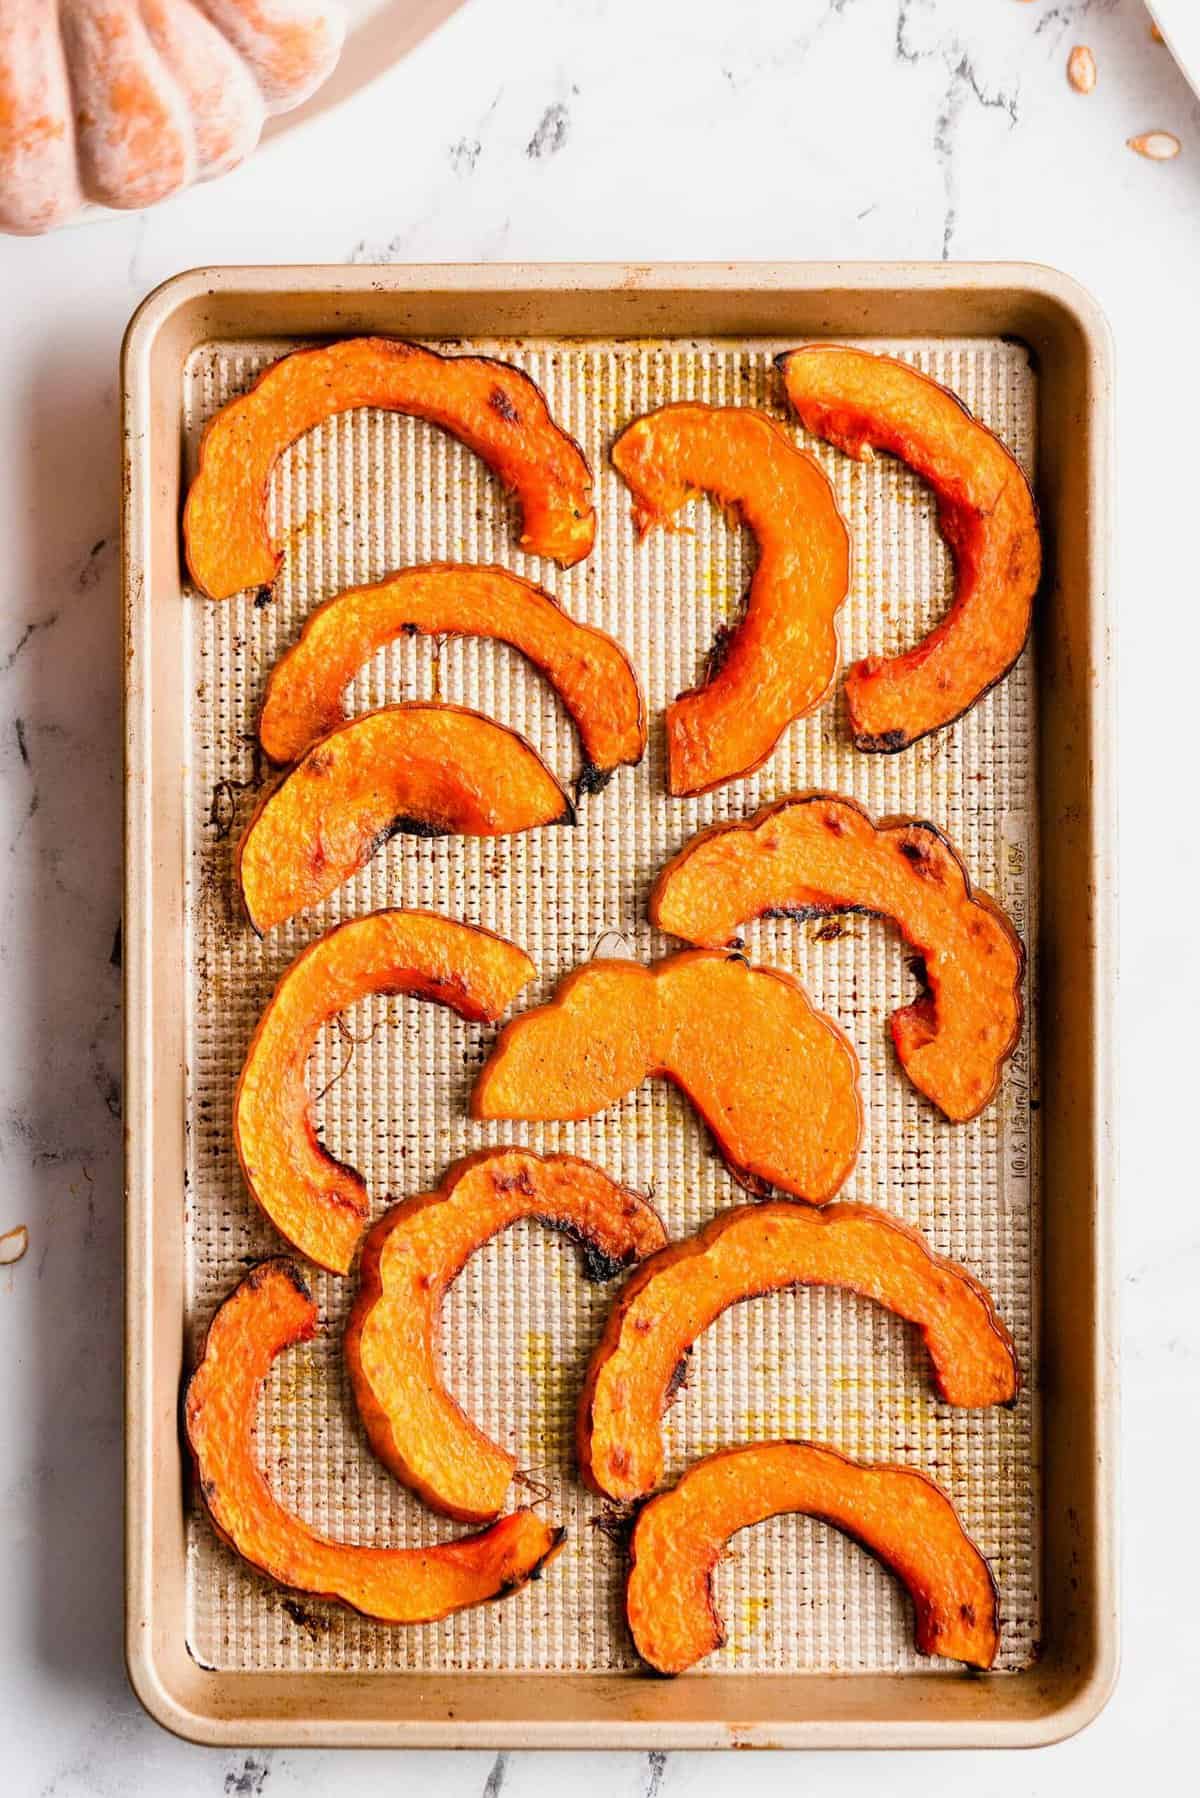 Overhead view of koginut squash slices on baking sheet after roasting